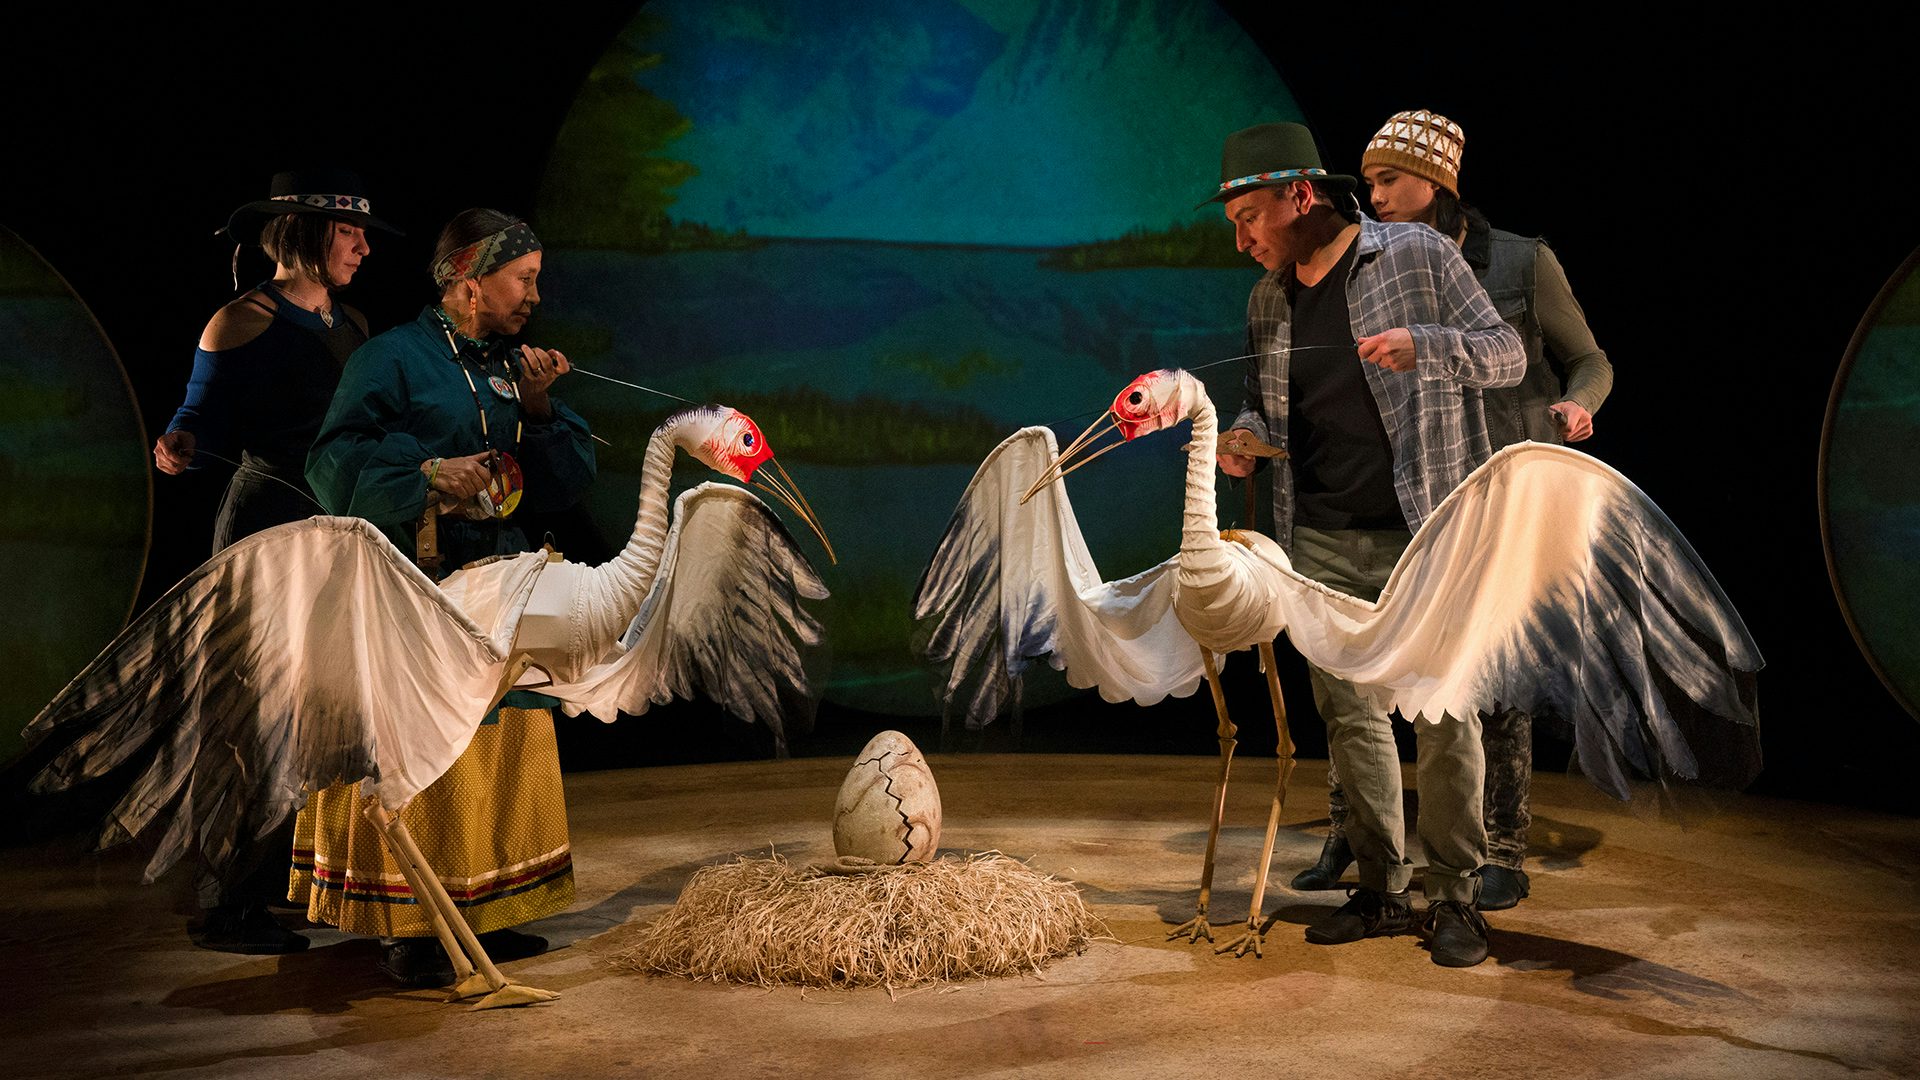 Several cast members operate two large crane puppets in a scene from Ibex Puppetry's Ajijaak on Turtle Island.